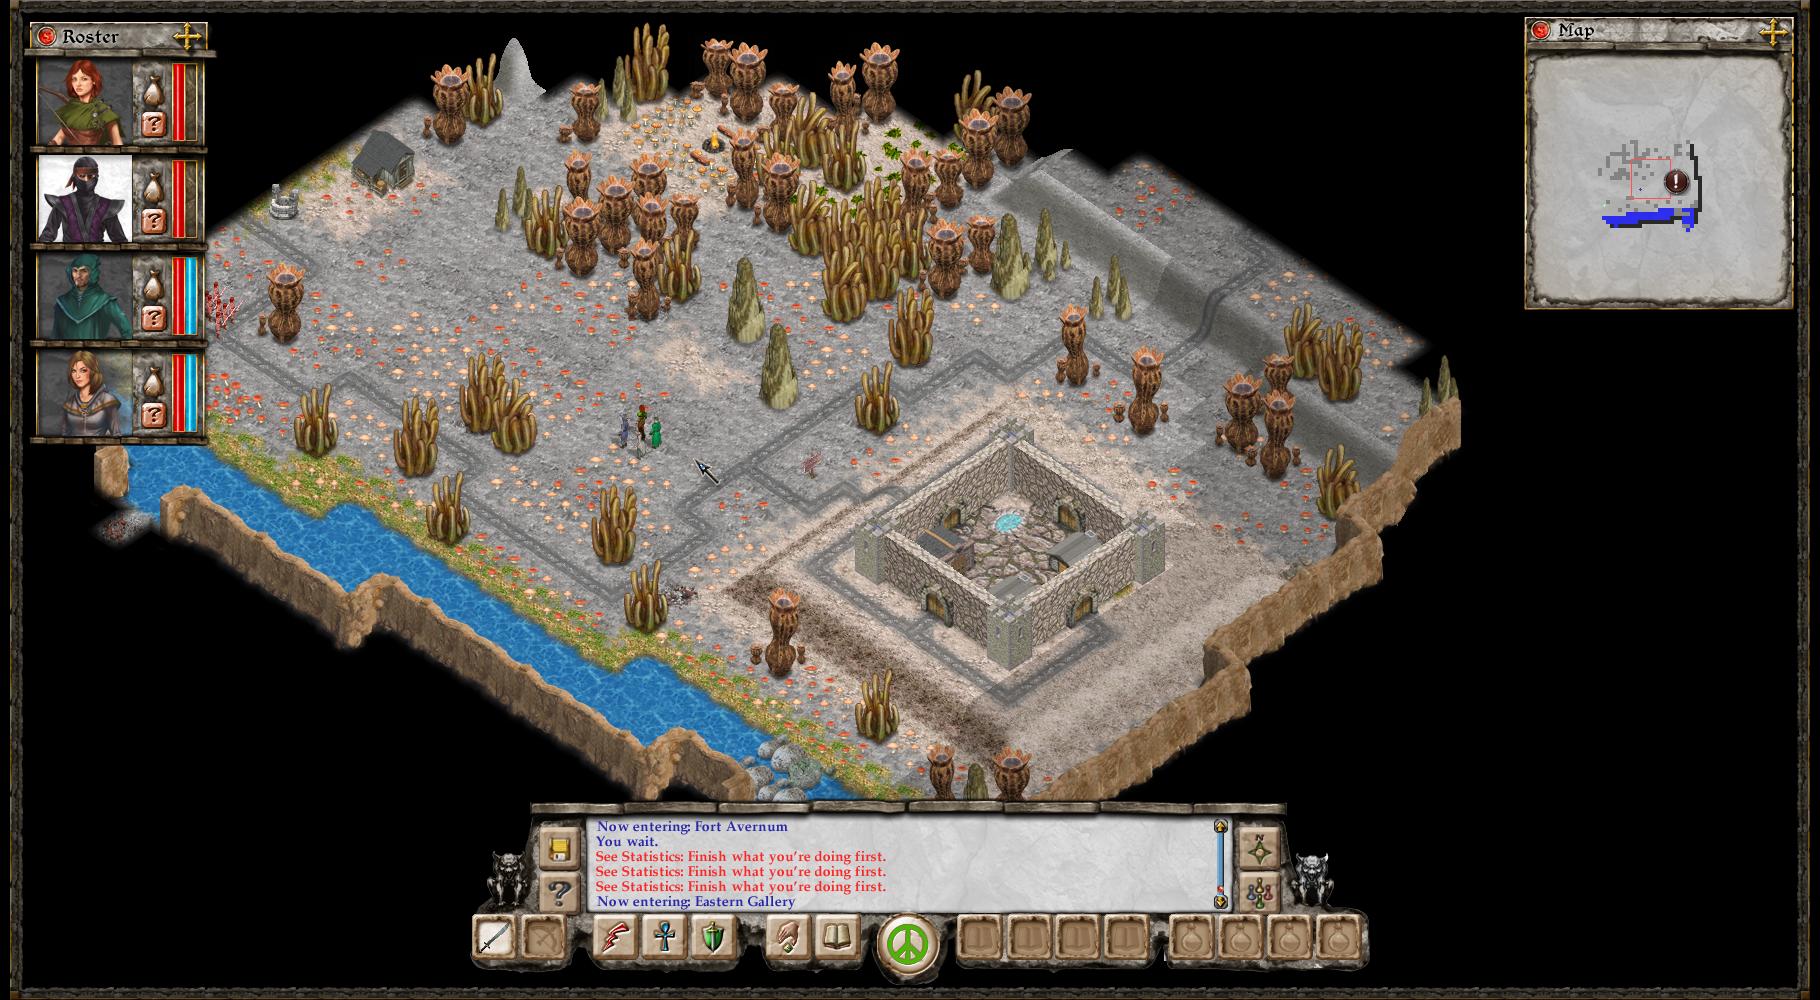 Avernum Escape From the Pit download the new version for mac